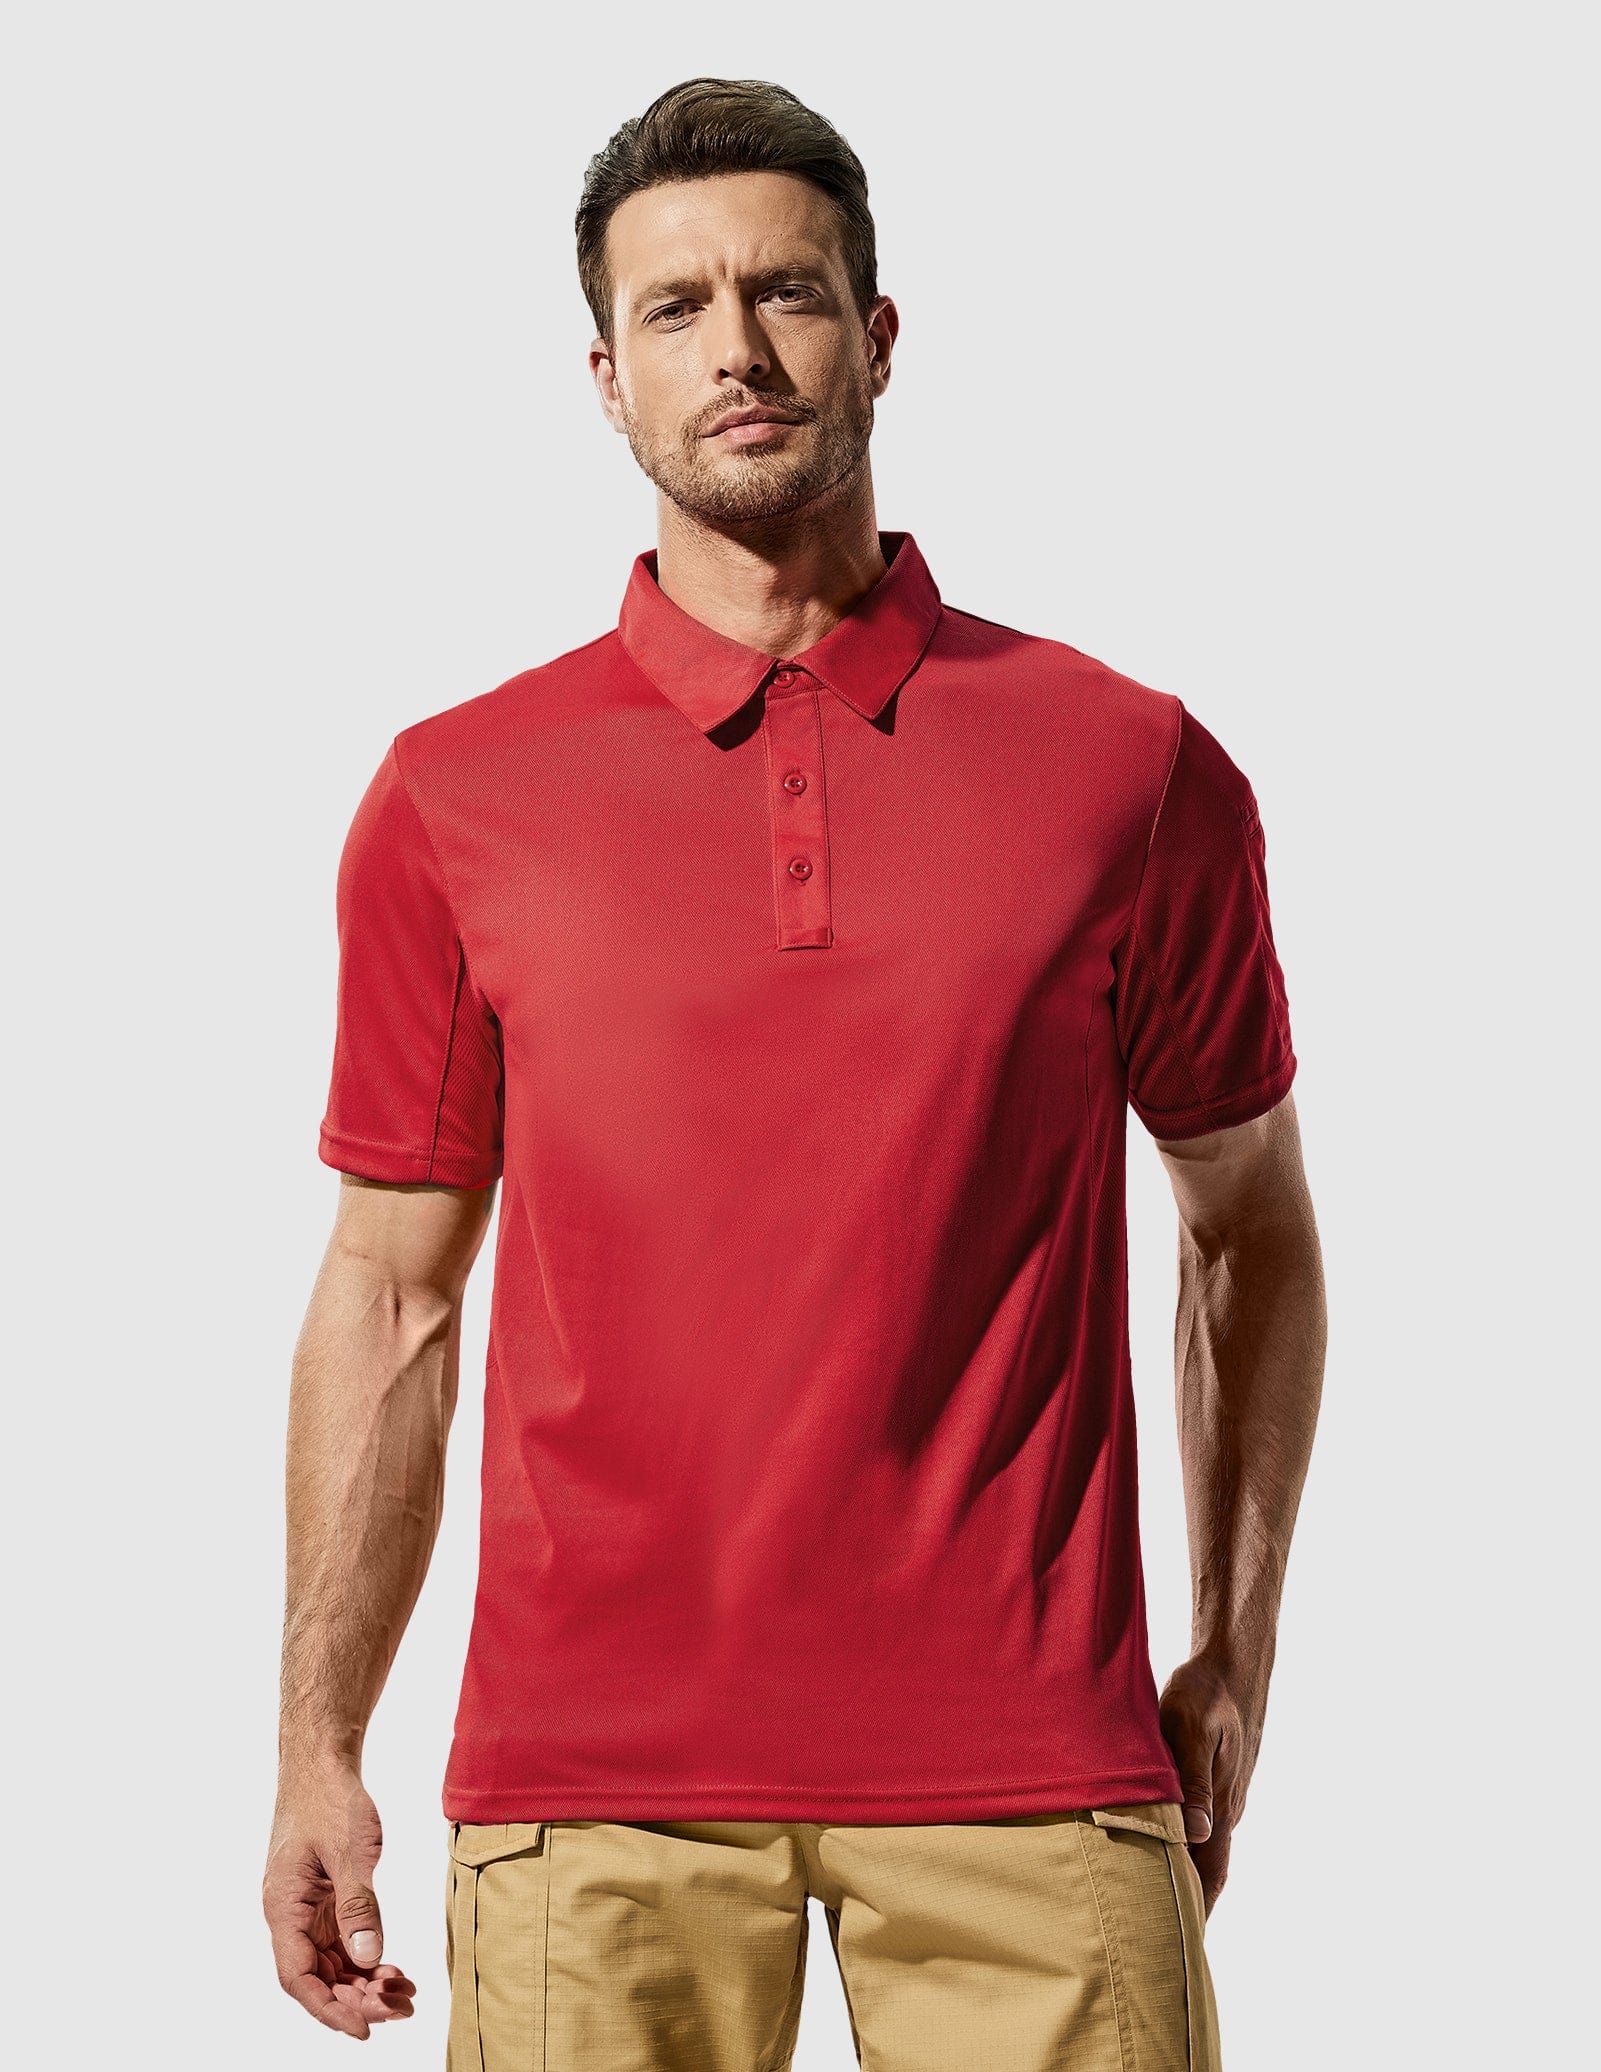 Men's Tactical Polo Shirts Outdoor Performance Collared Shirt Men Polo Red / S MIER